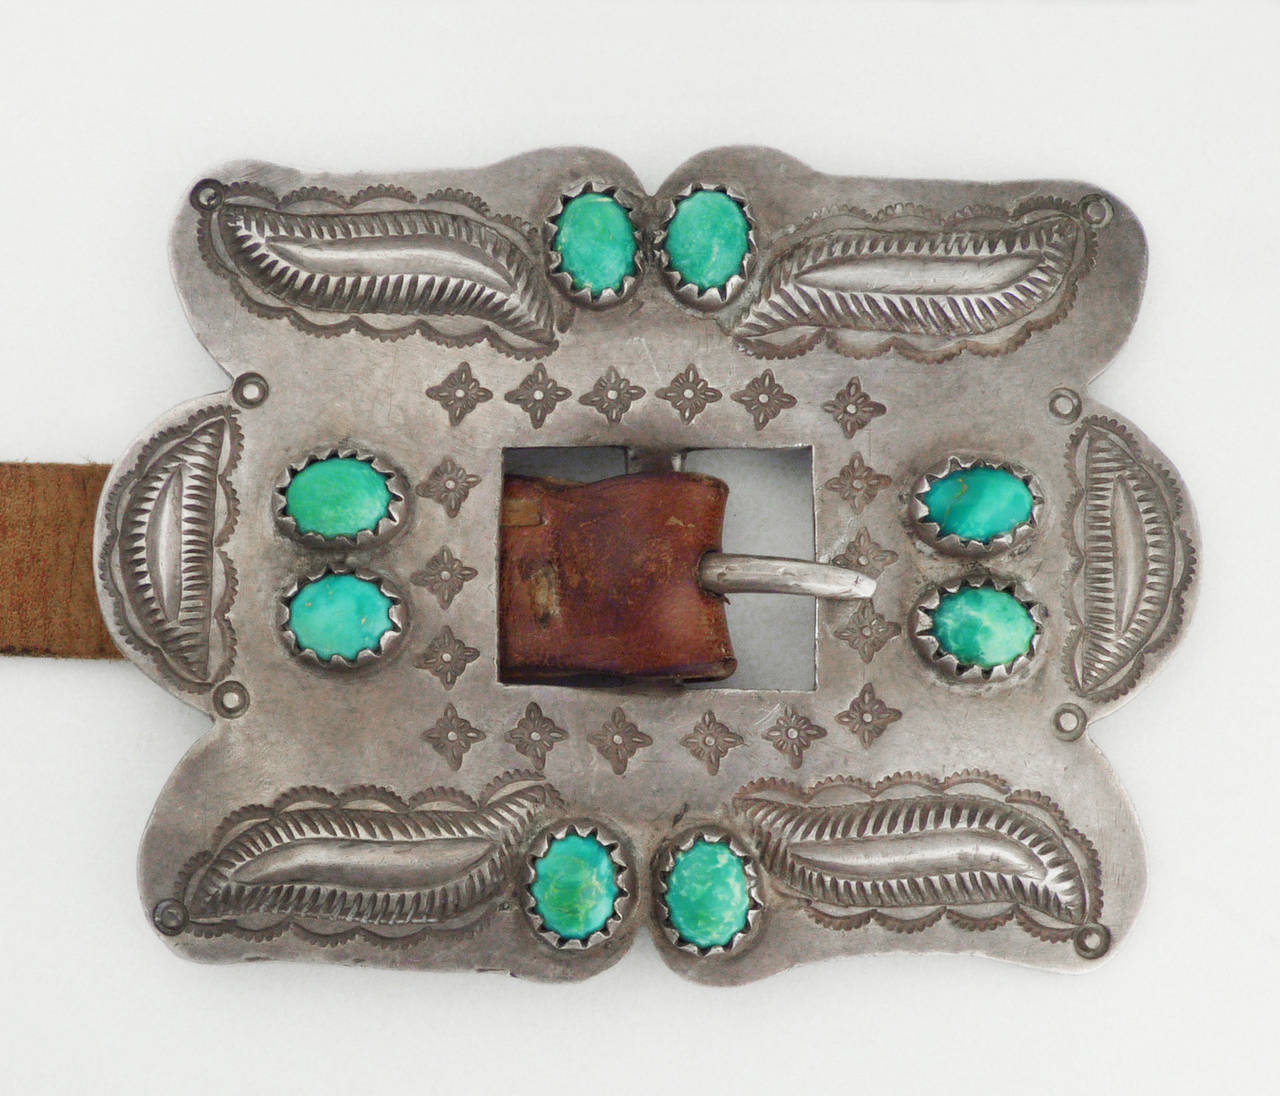 An exquisite Third Phase Concho Belt, c. 1920. This belt consists of six conchos and a buckle, made of heavy gauge silver with repousse, stamped and chiseled elements. It is set with thirty-eight hand made bezels, with highly unusual Persian-cut